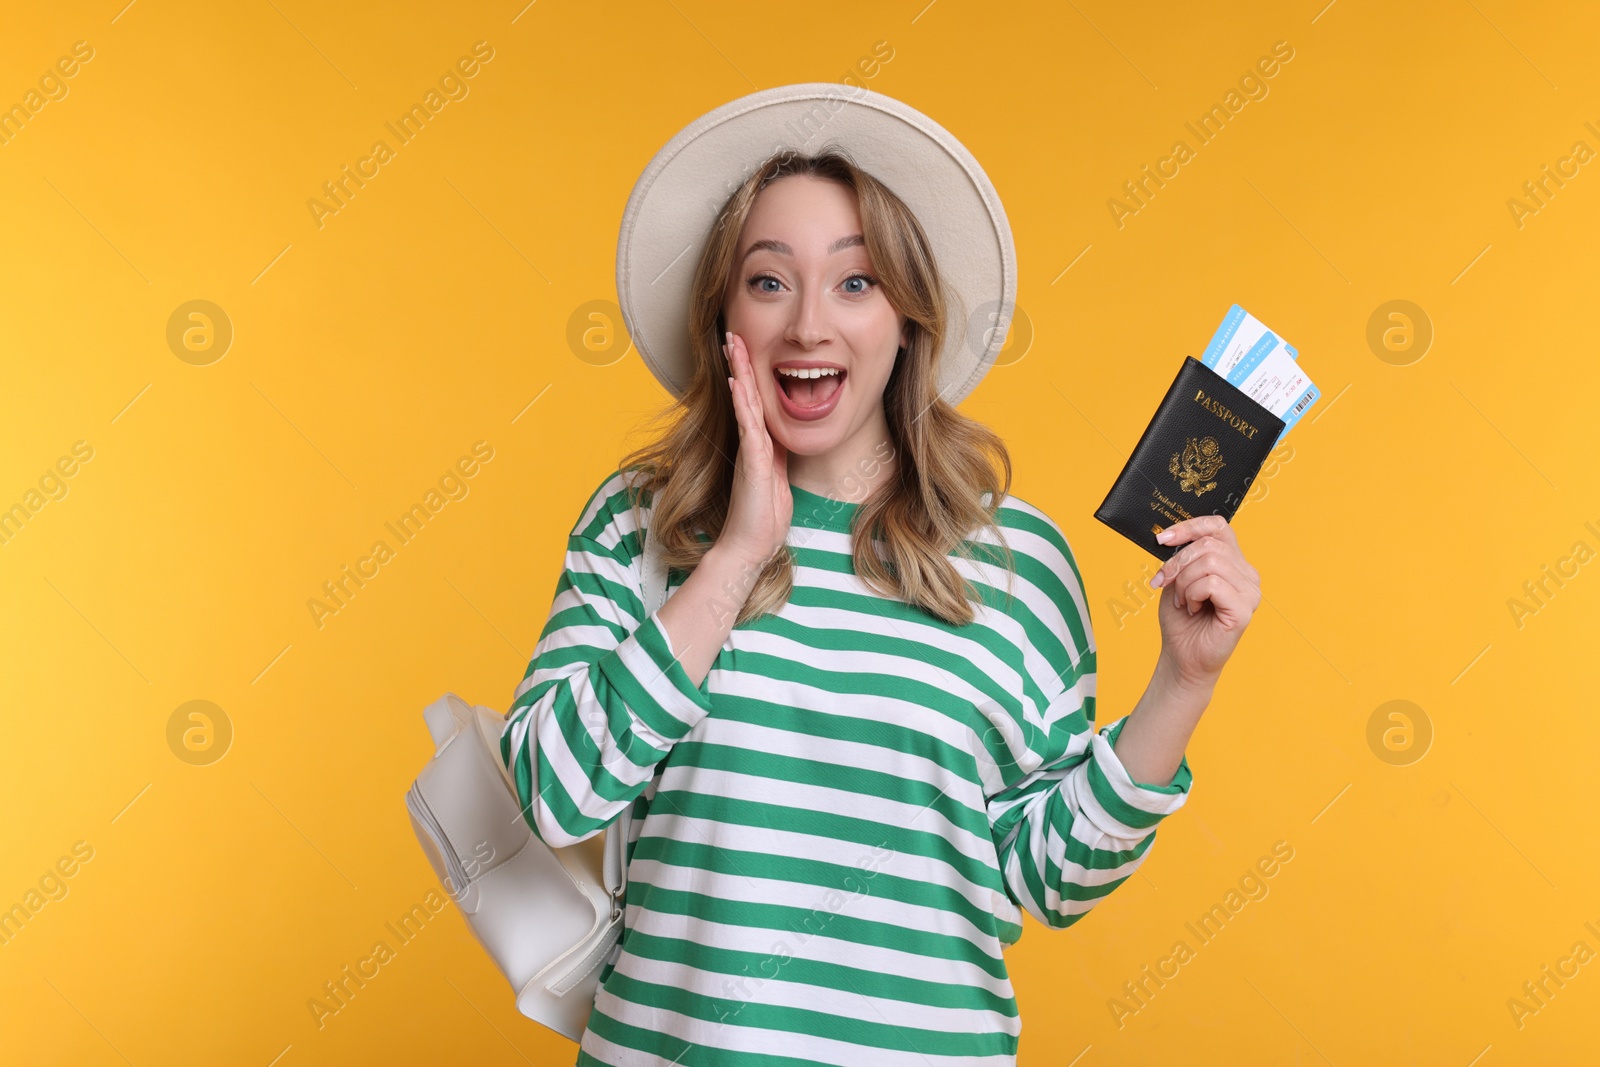 Photo of Emotional young woman with passport, ticket and hat on yellow background